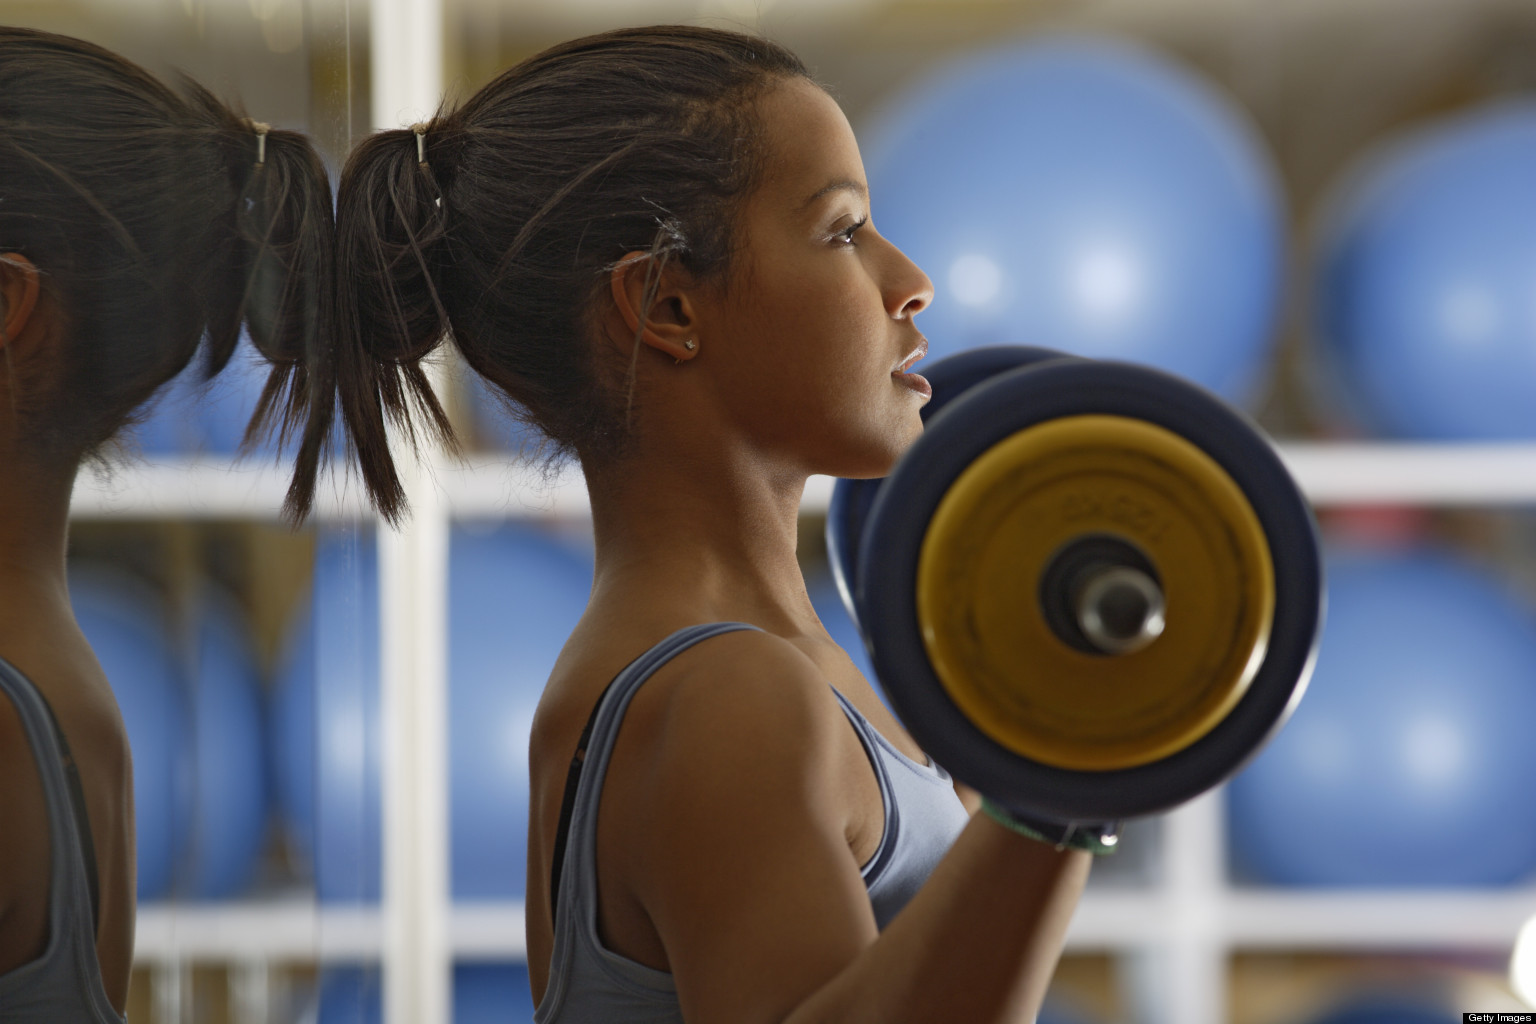 cardio-or-weights-first-exercise-order-sometimes-matters-huffpost